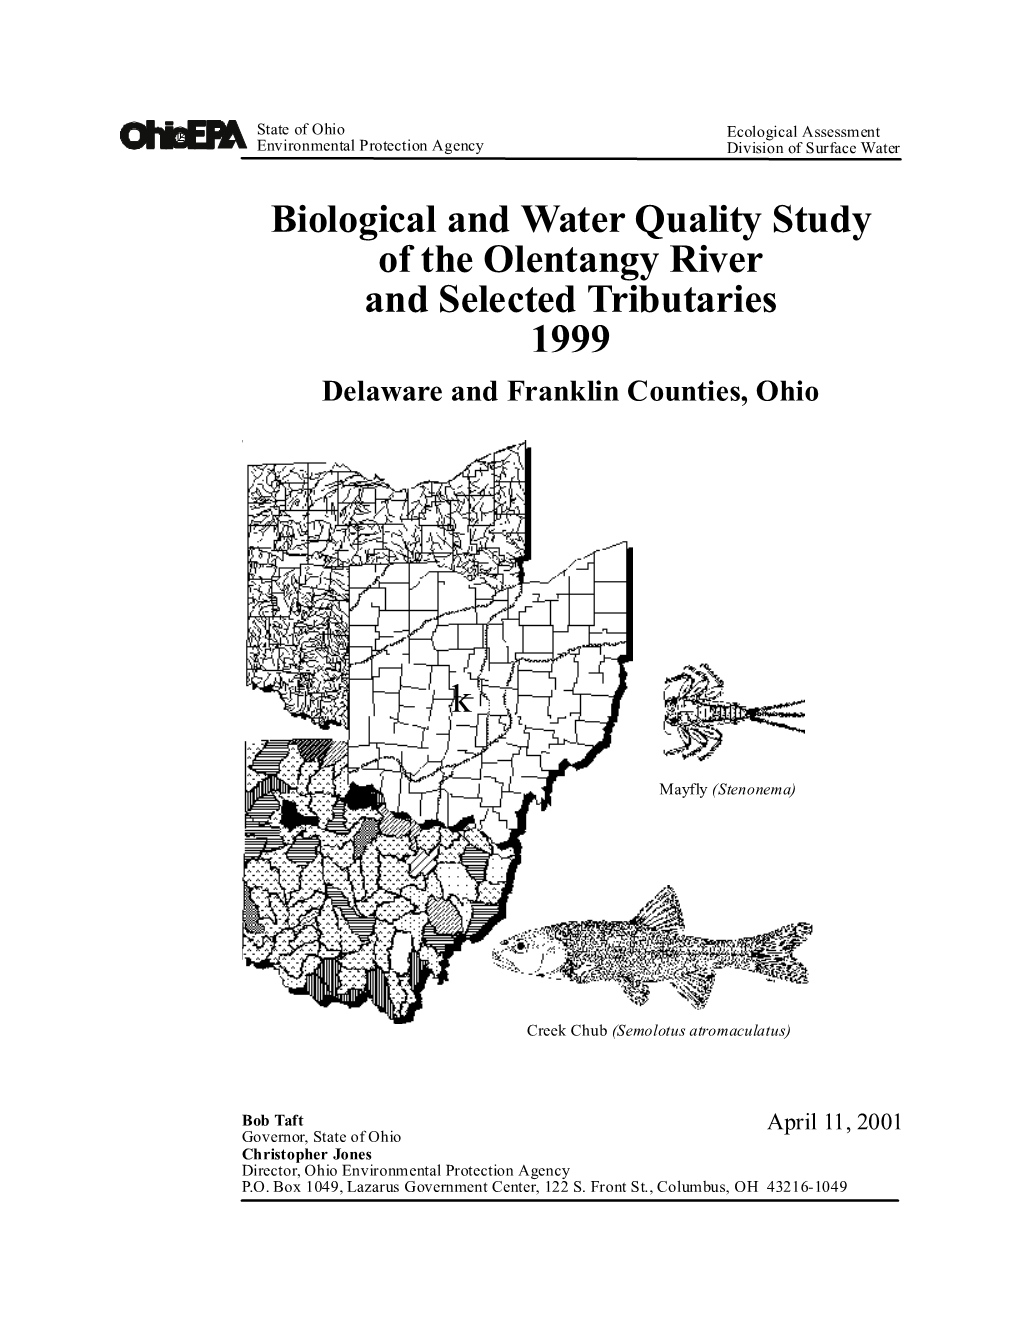 Biological and Water Quality Study of the Olentangy River and Selected Tributaries 1999 Delaware and Franklin Counties, Ohio